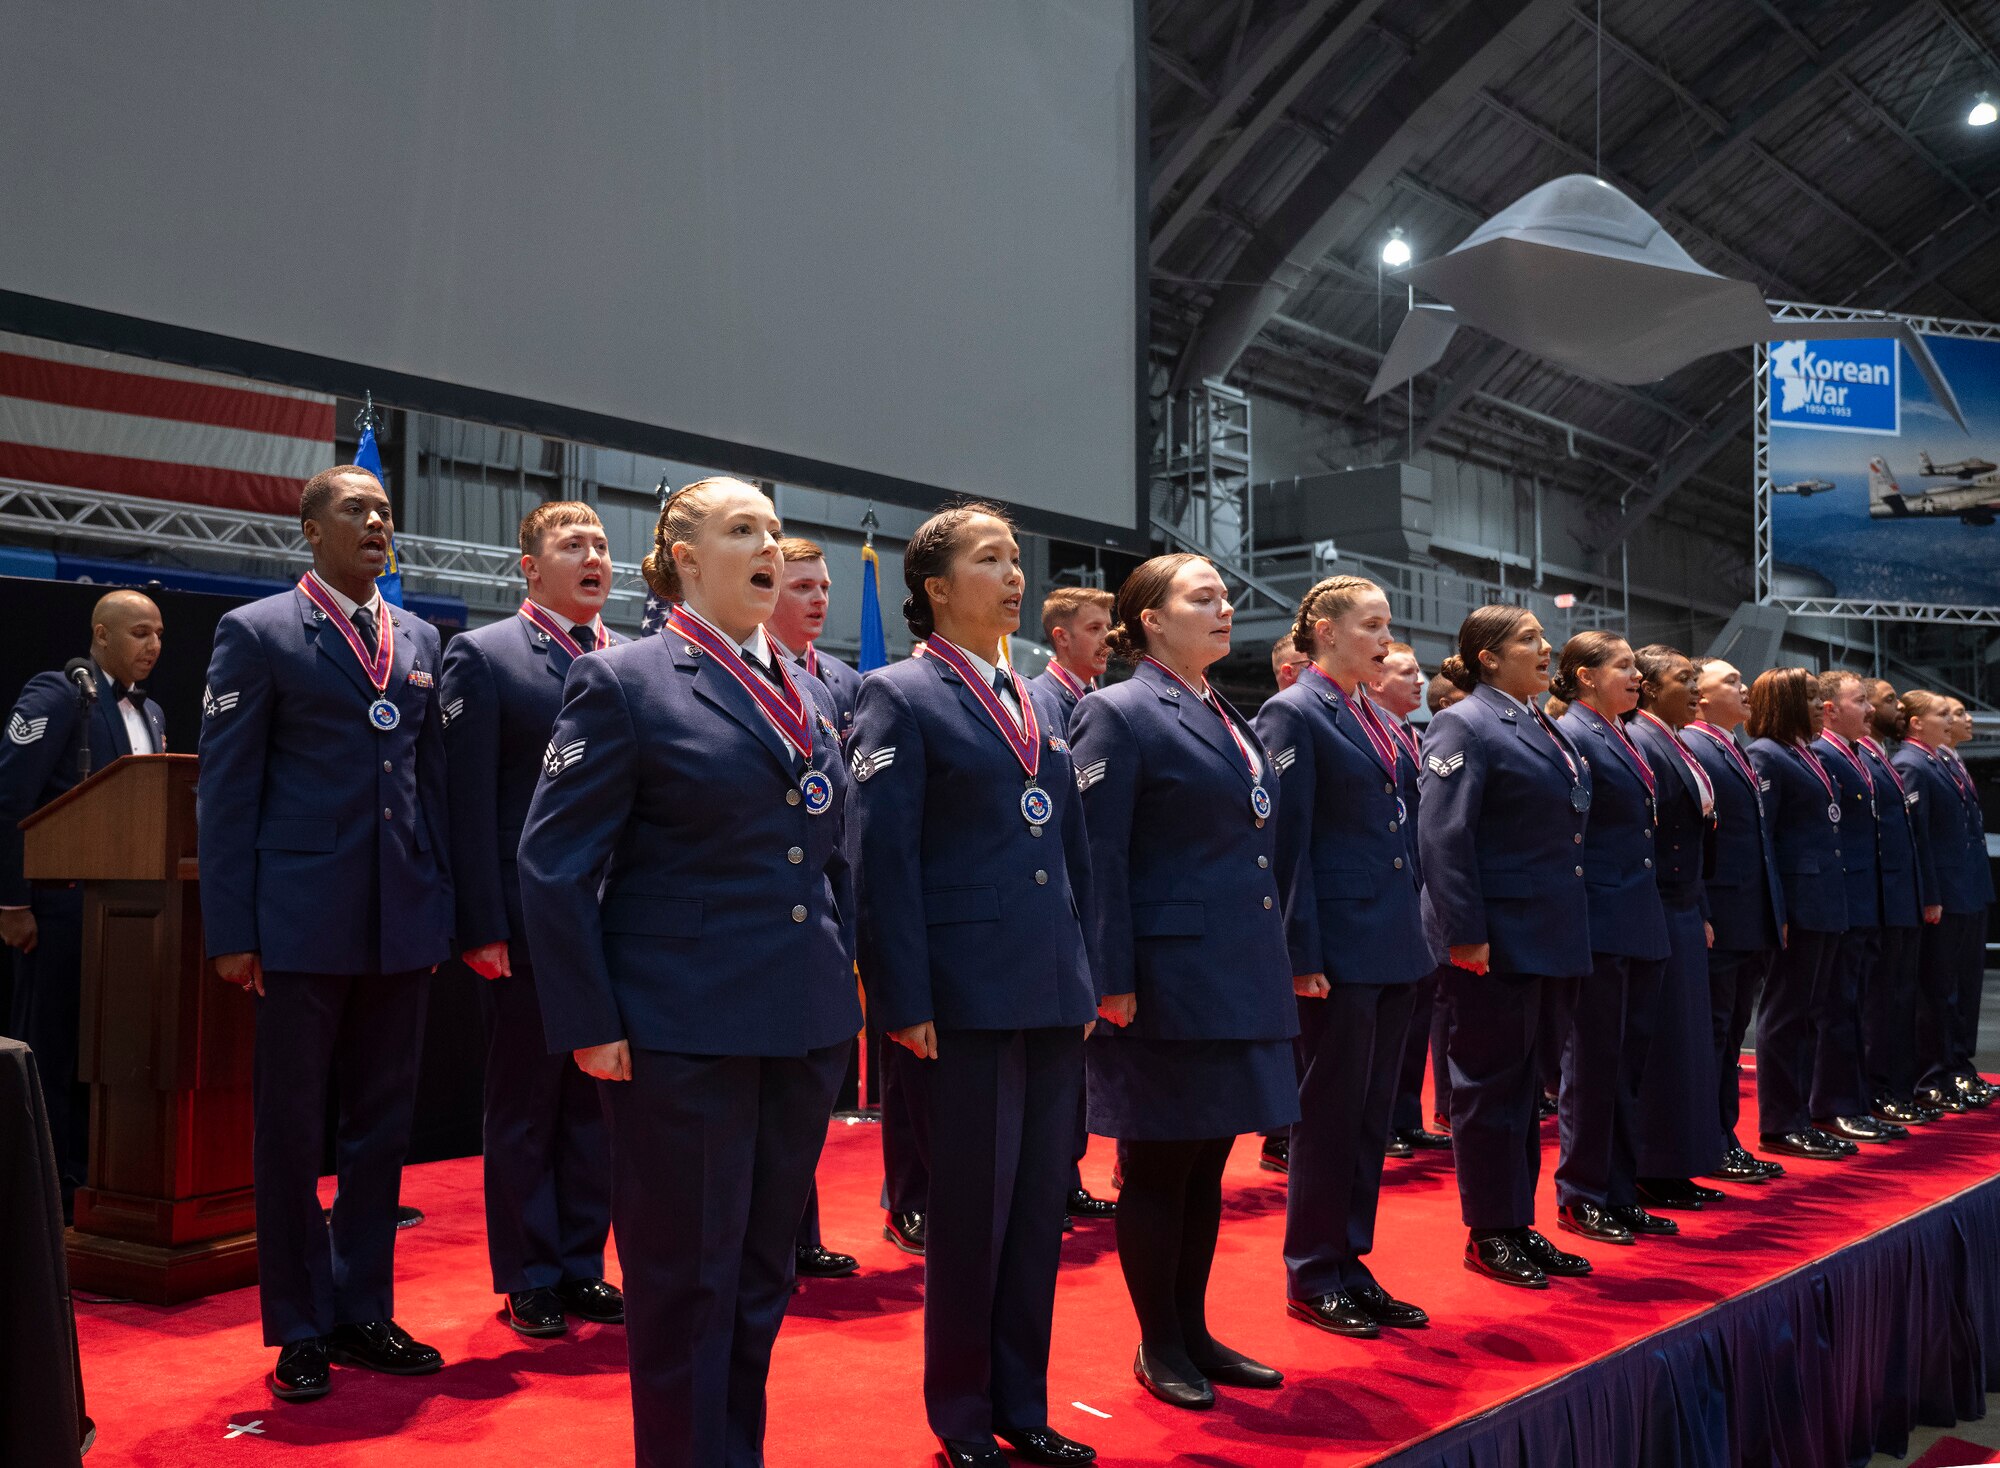 A group of Airman stand in formation on stage.